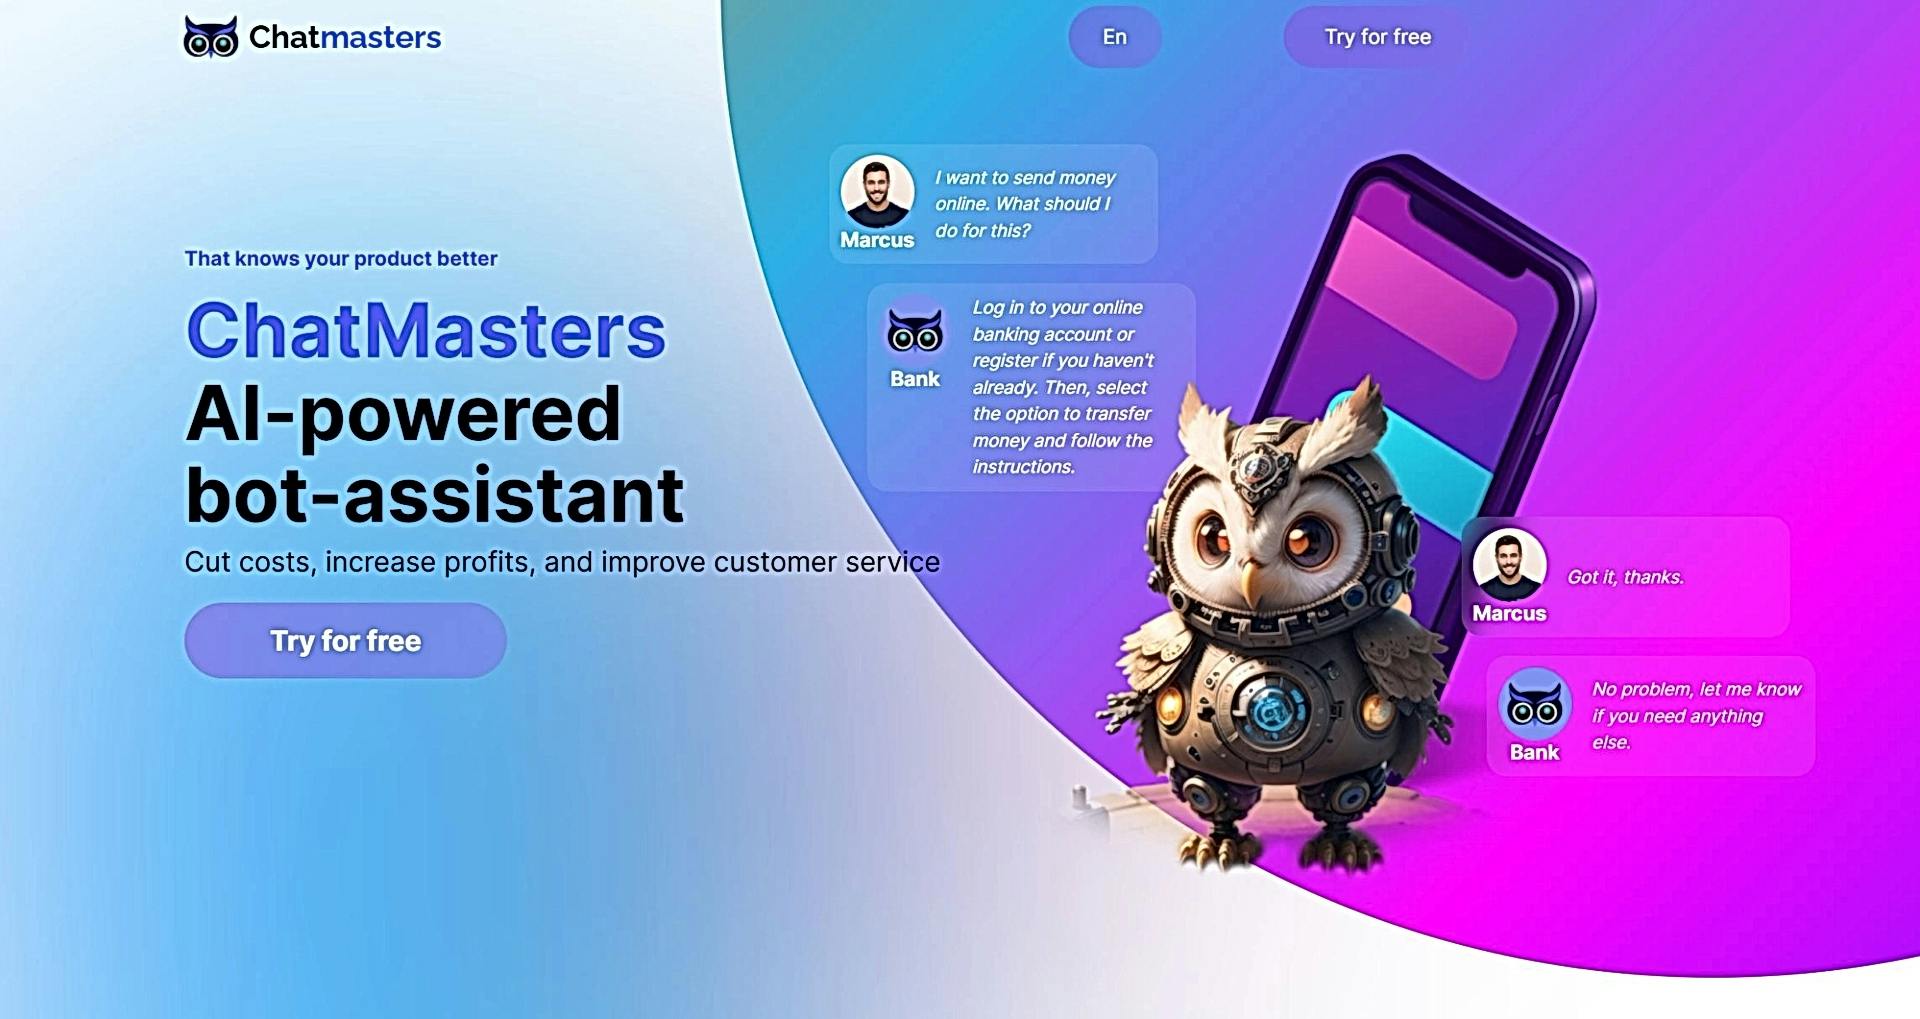 Chatmasters featured